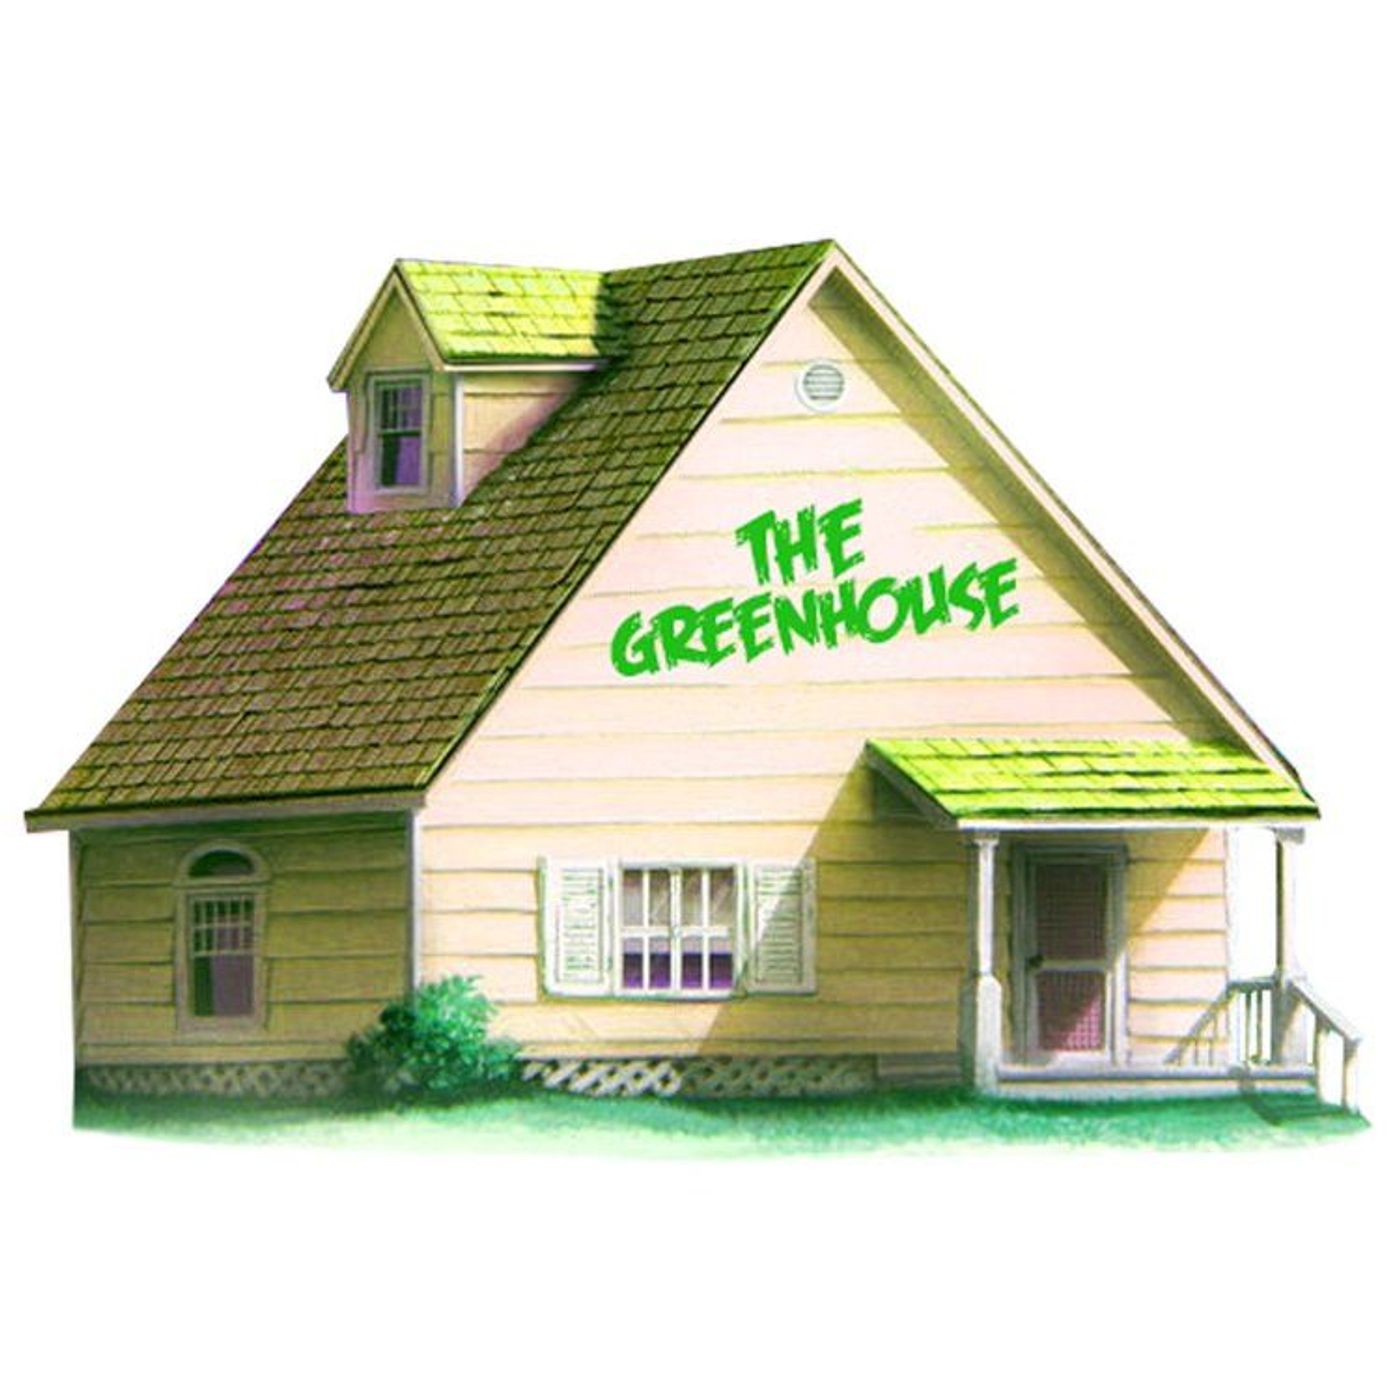 The GreenHouse